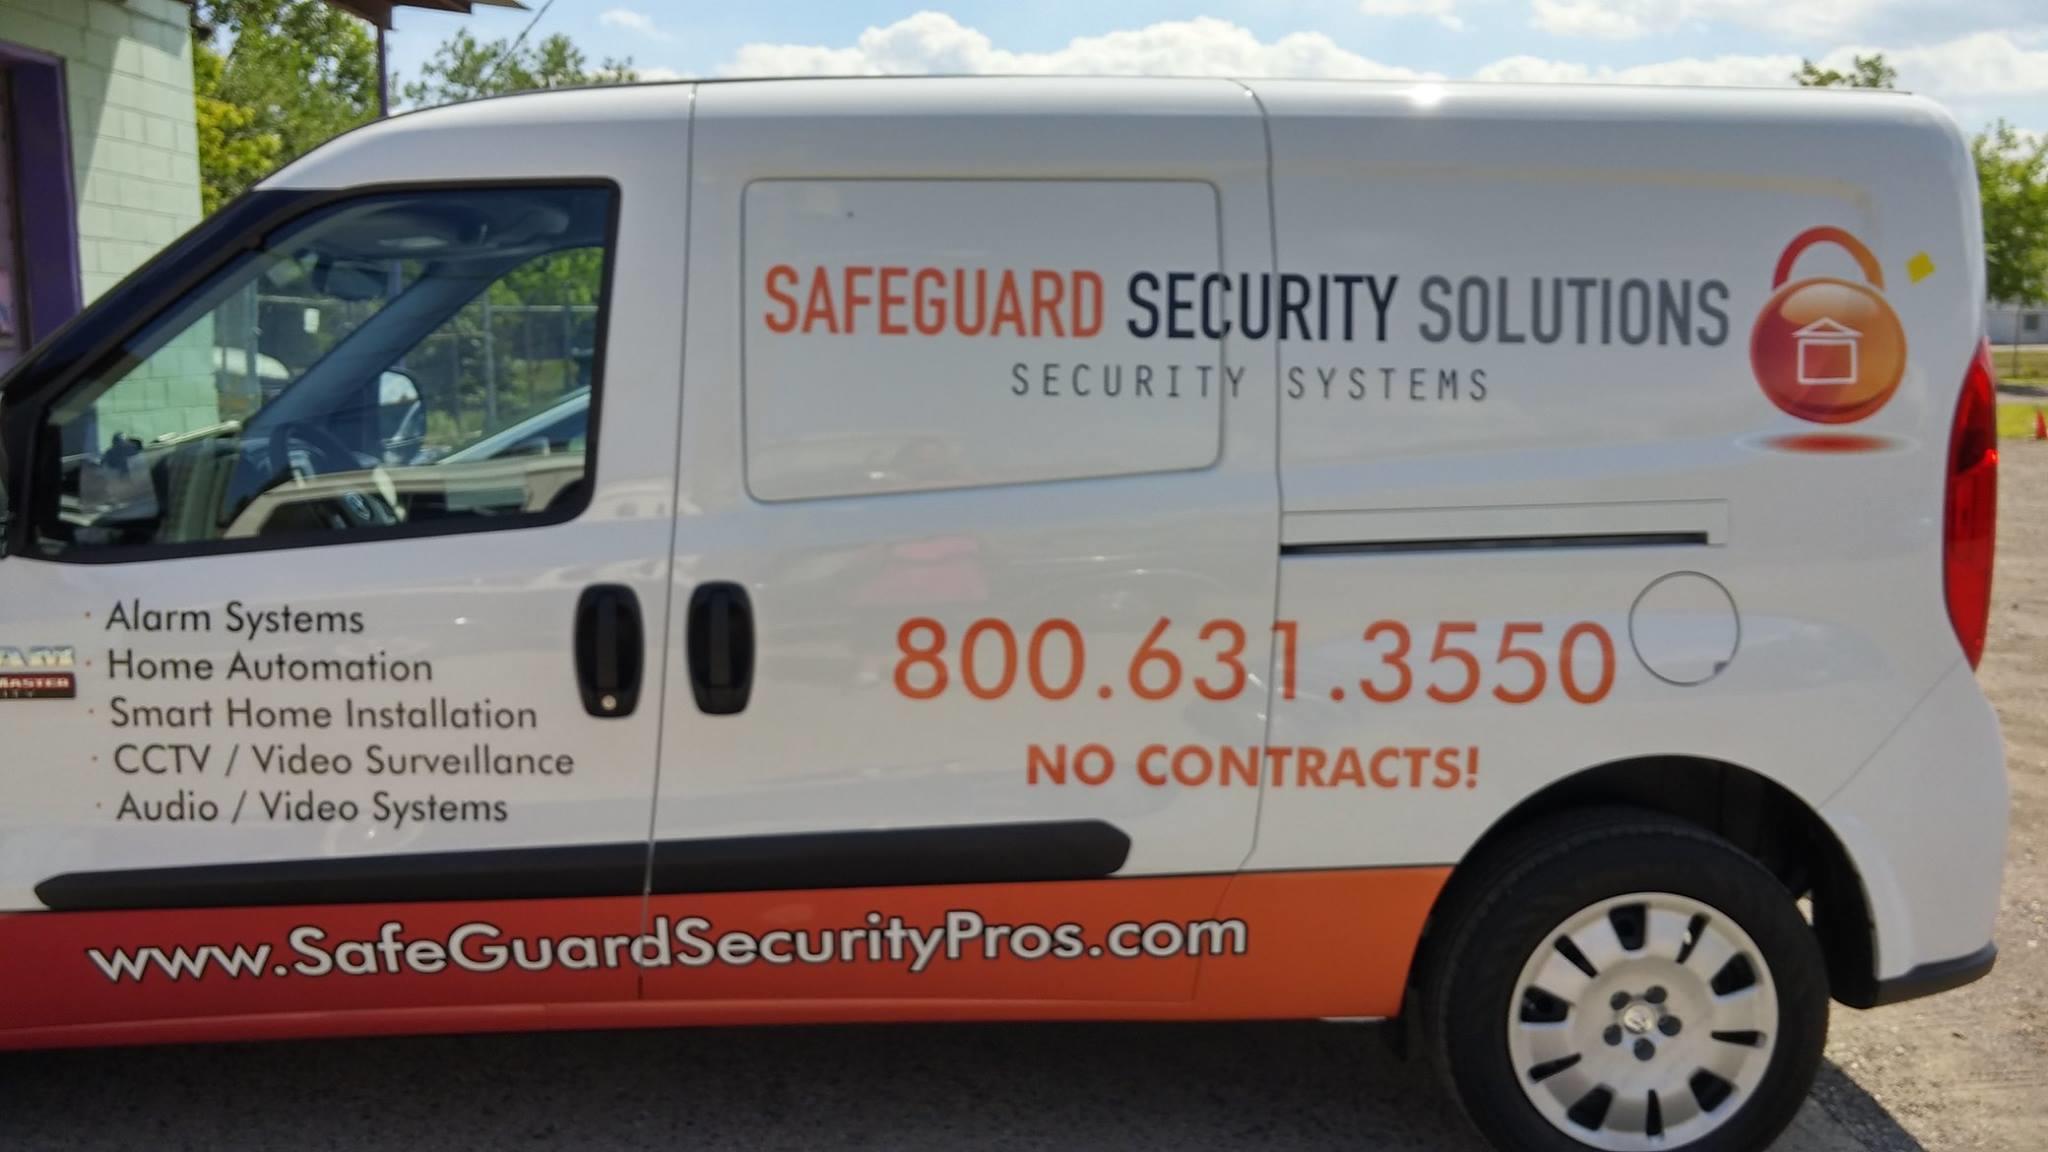 Safeguard Security Solutions Photo